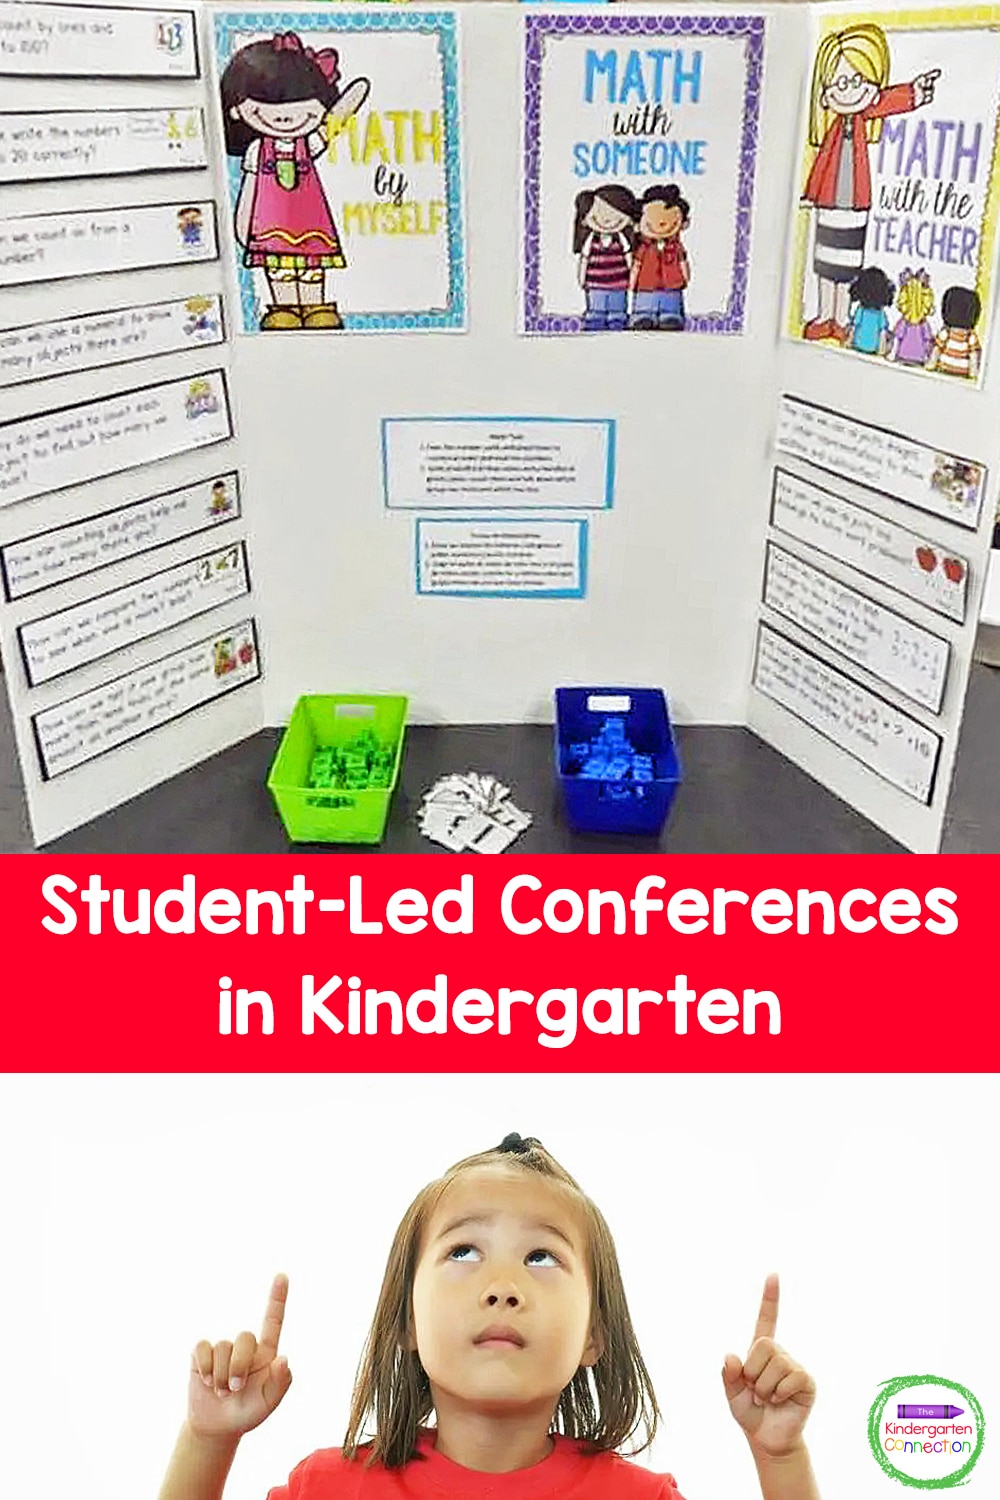 Read on for my experience with student-led conferences in Kindergarten, why I love them, and how they work!